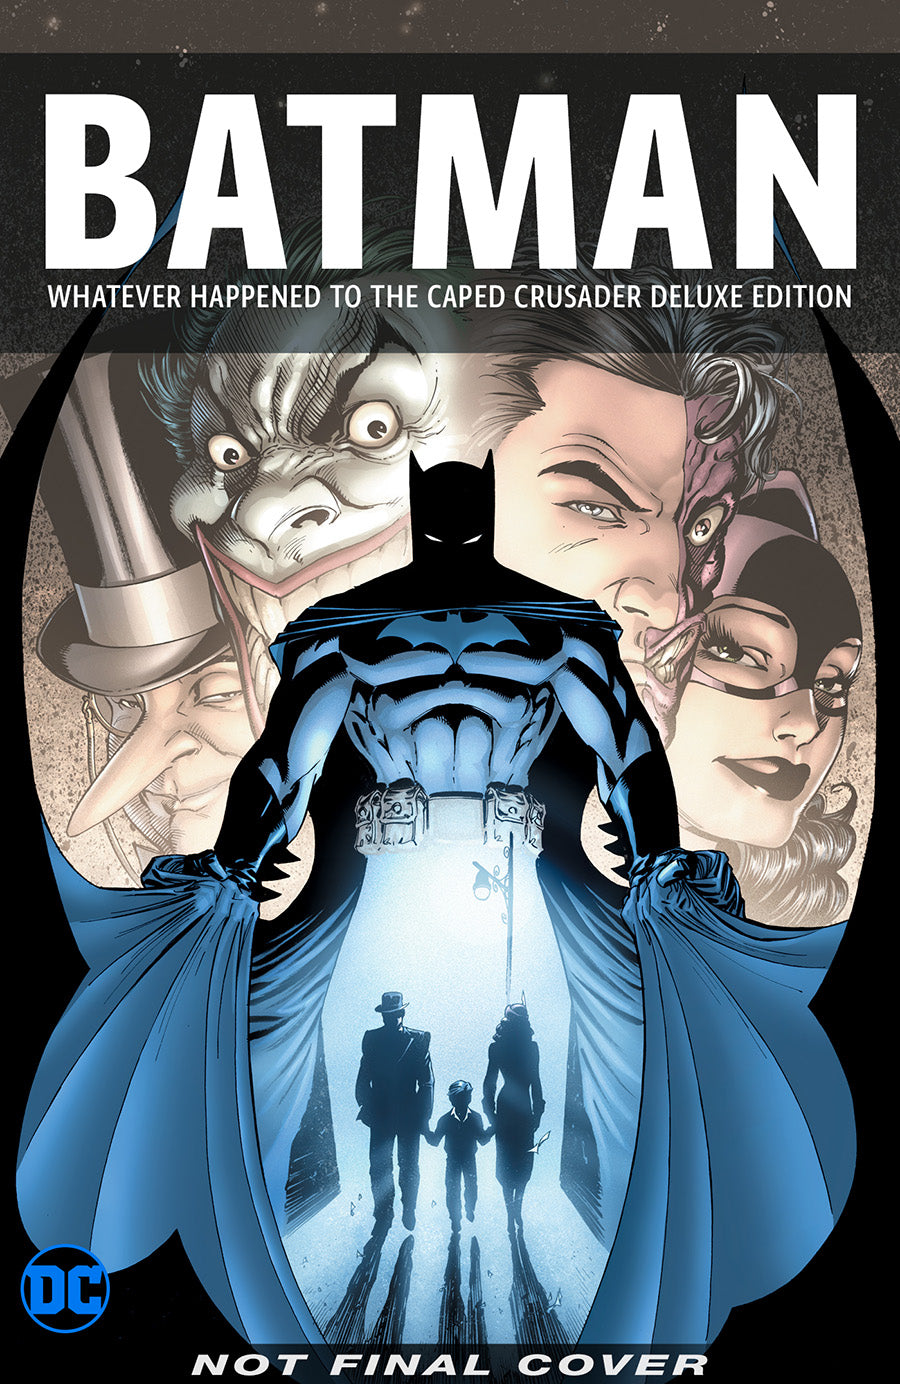 BATMAN WHATEVER HAPPENED TO THE CAPED CRUSADER 2020 DLX HC | BD Cosmos